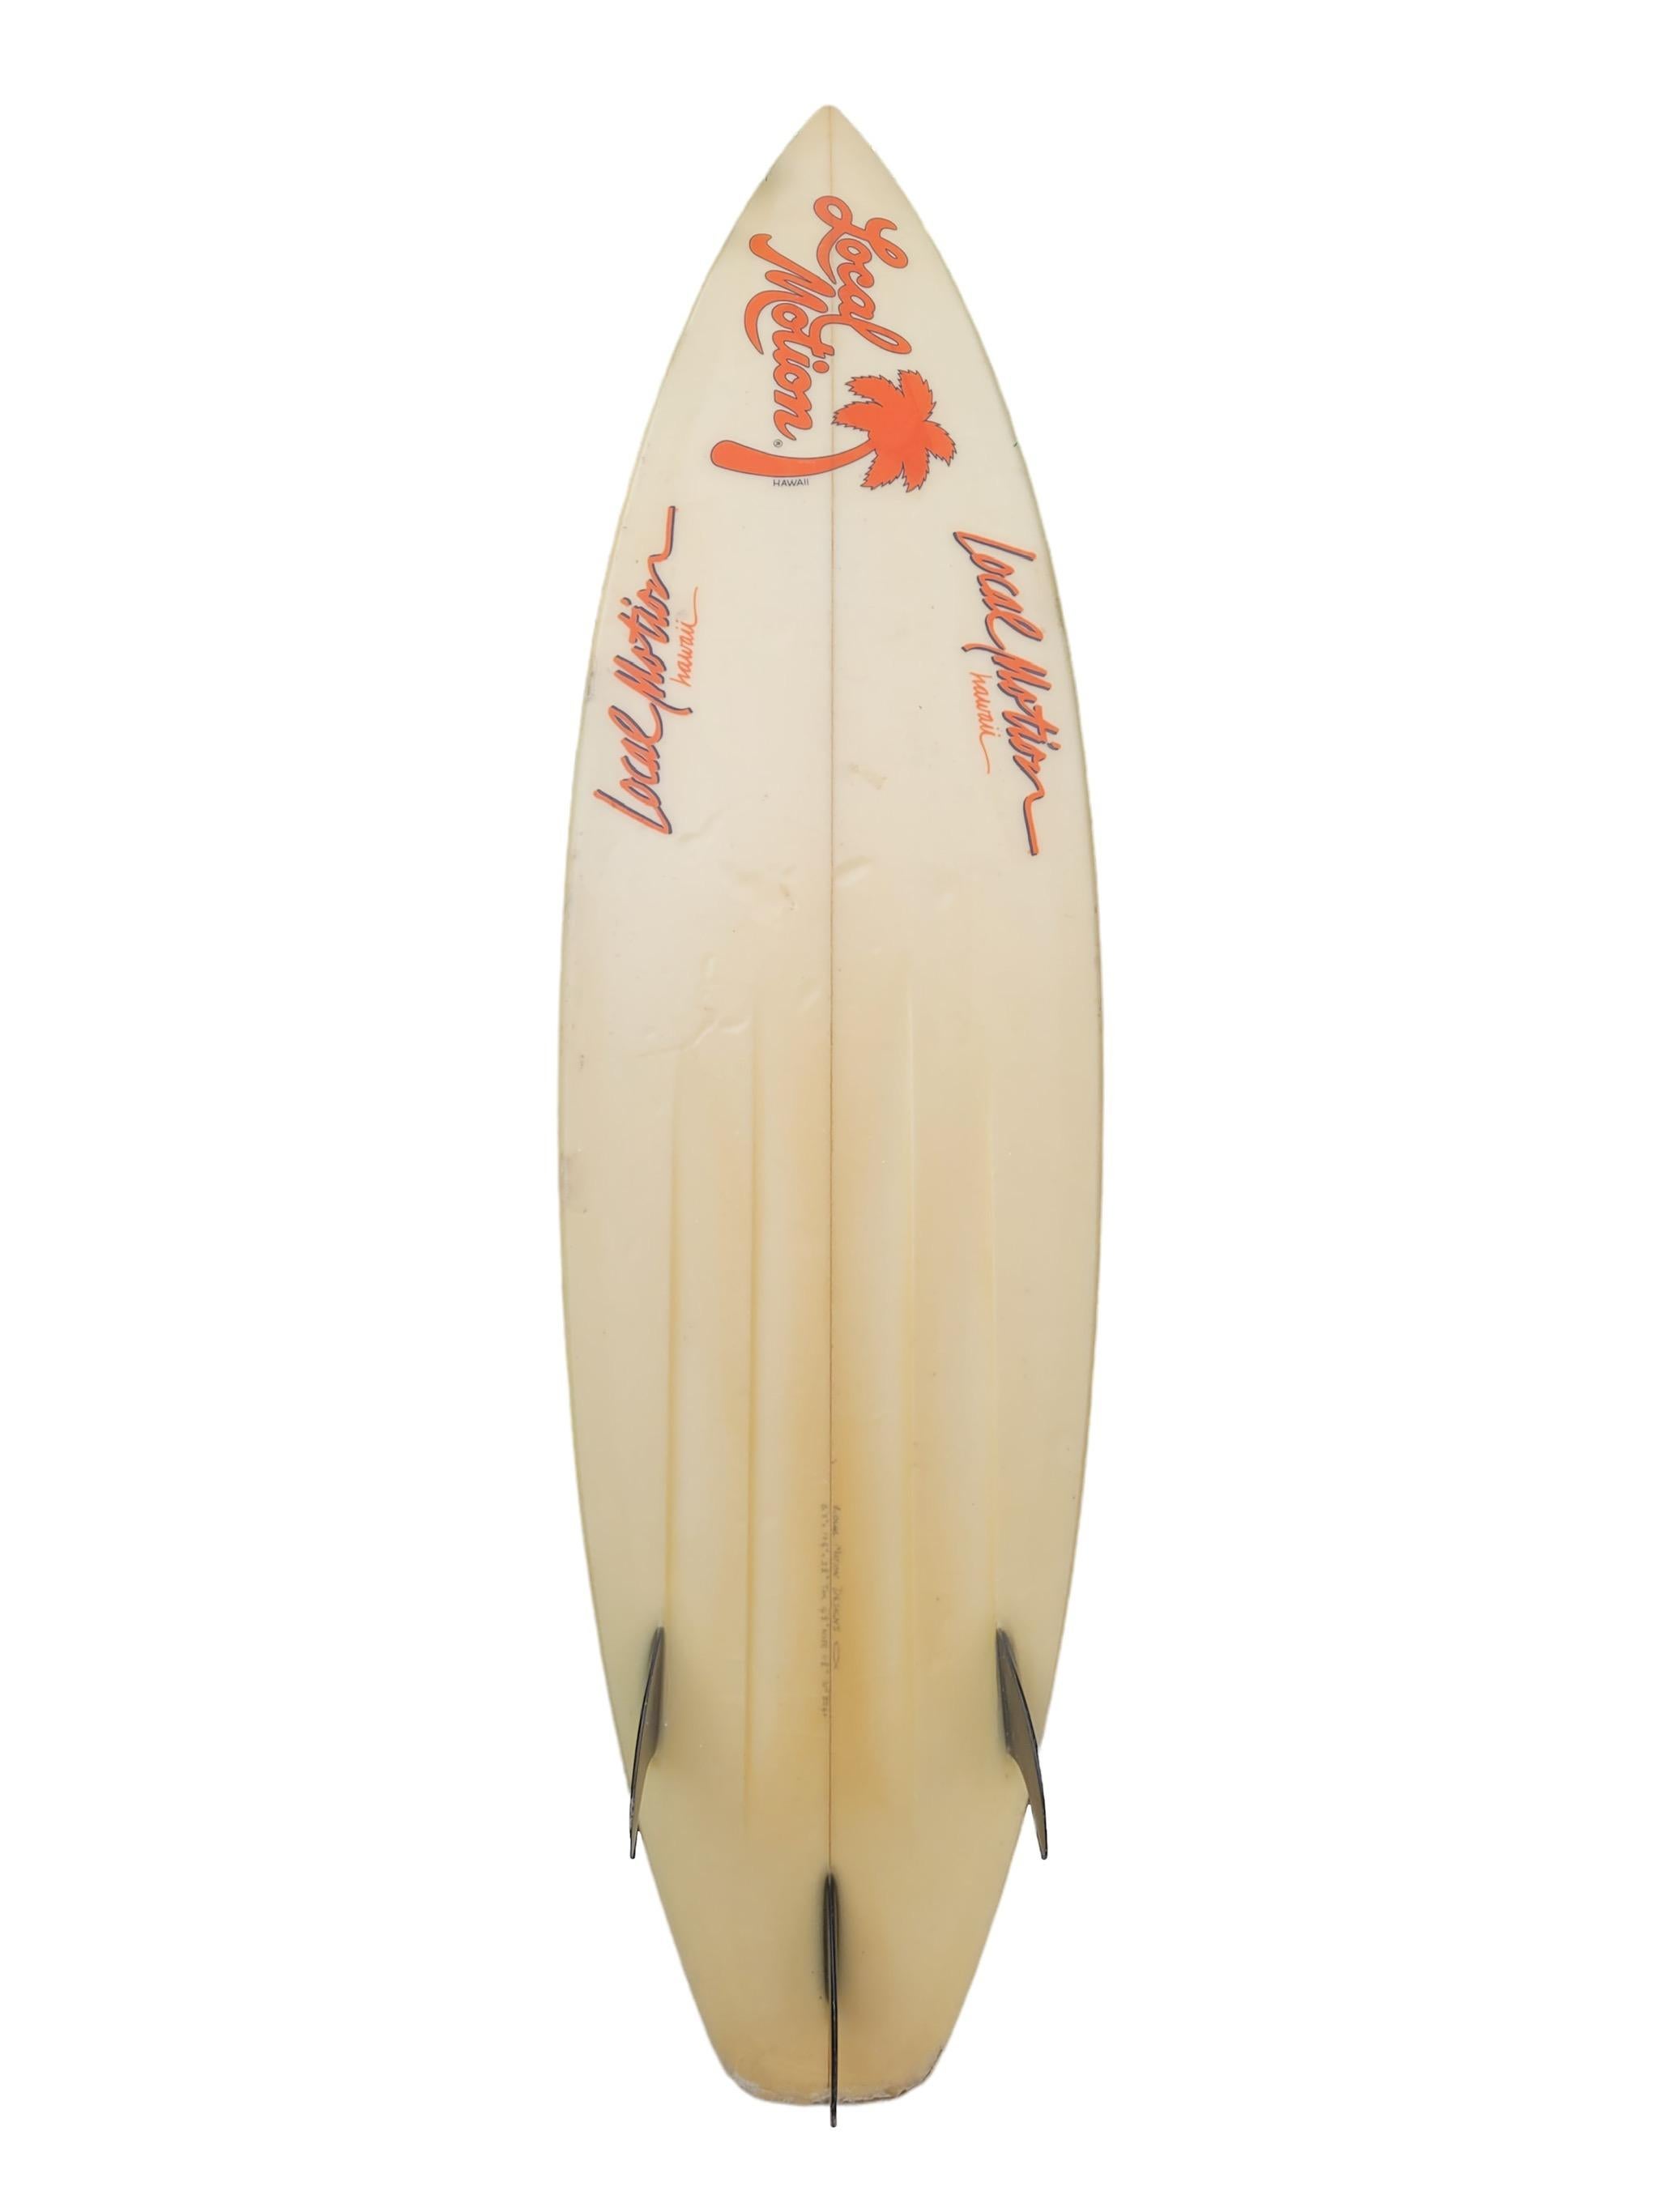 Vintage 1980s Local Motion surfboard. Features neon airbrushed tribal artwork design with glass-on on thruster (tri-fin) setup. A great example of a unique 1980s Local Motion surfboard in all original condition. 